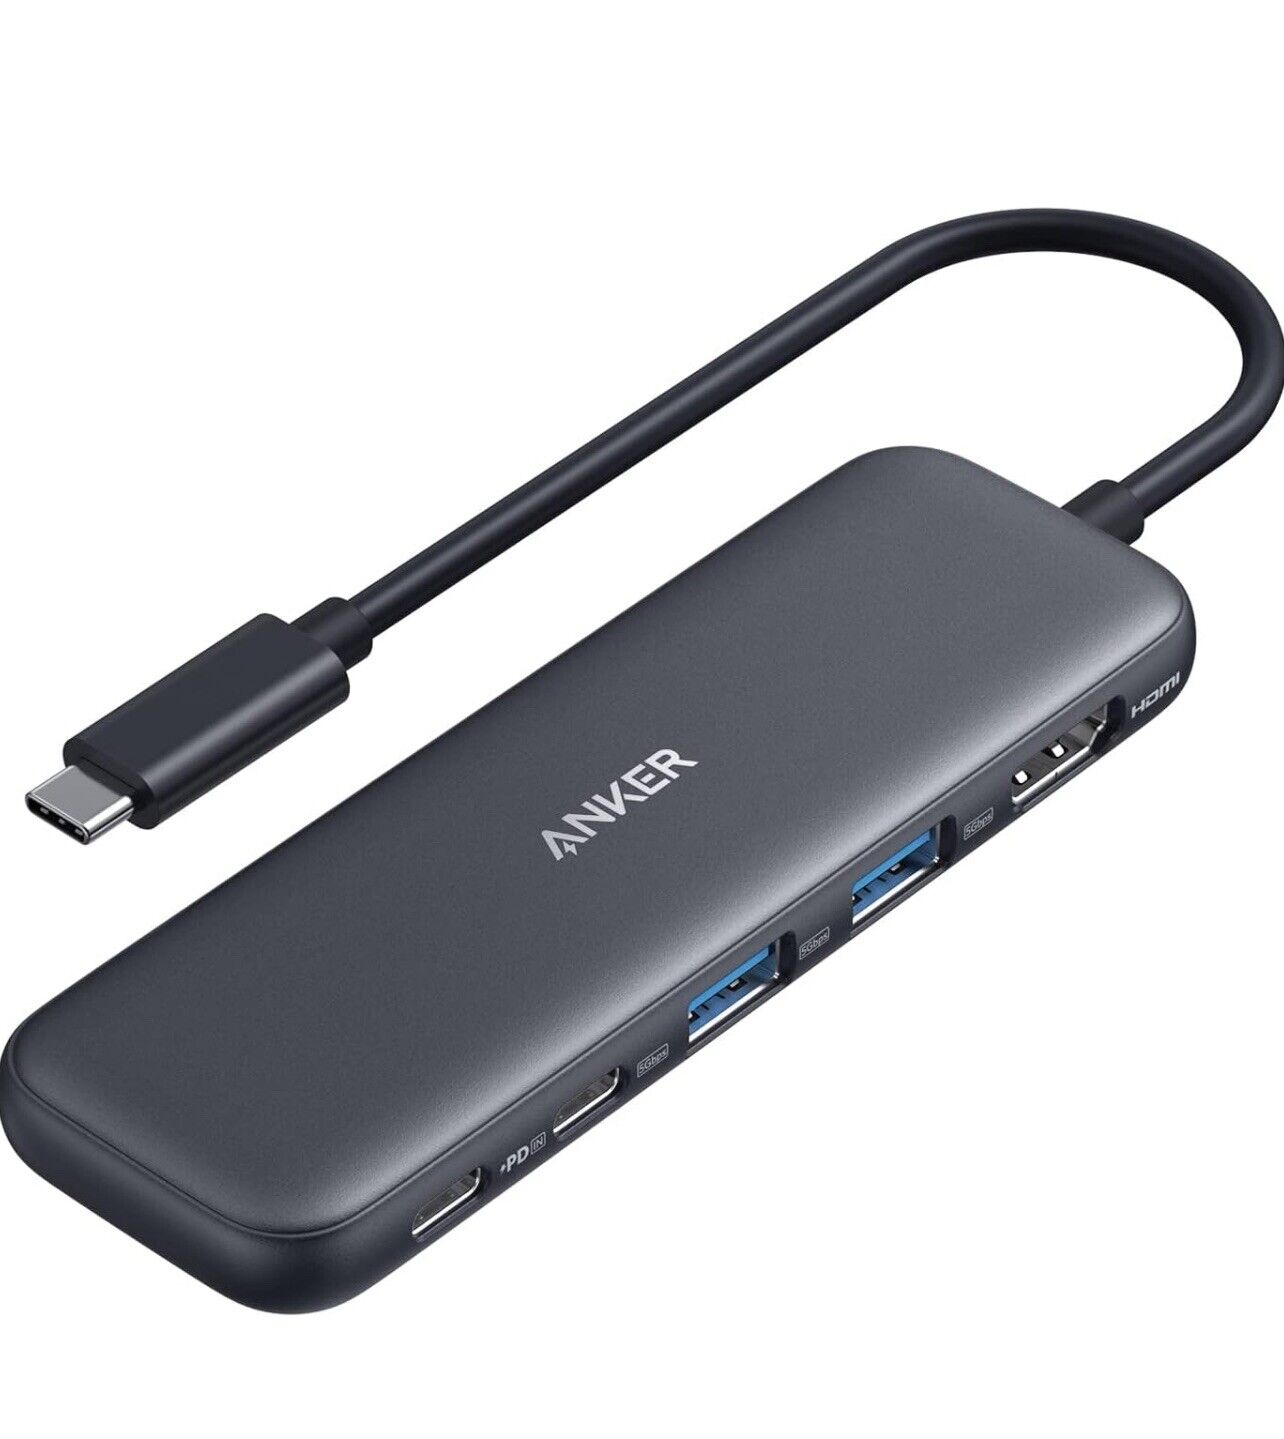 Anker 332 USB-C Hub Adapter 5-in-1 4K HDMI Display 85W Charge for MacBook/Laptop